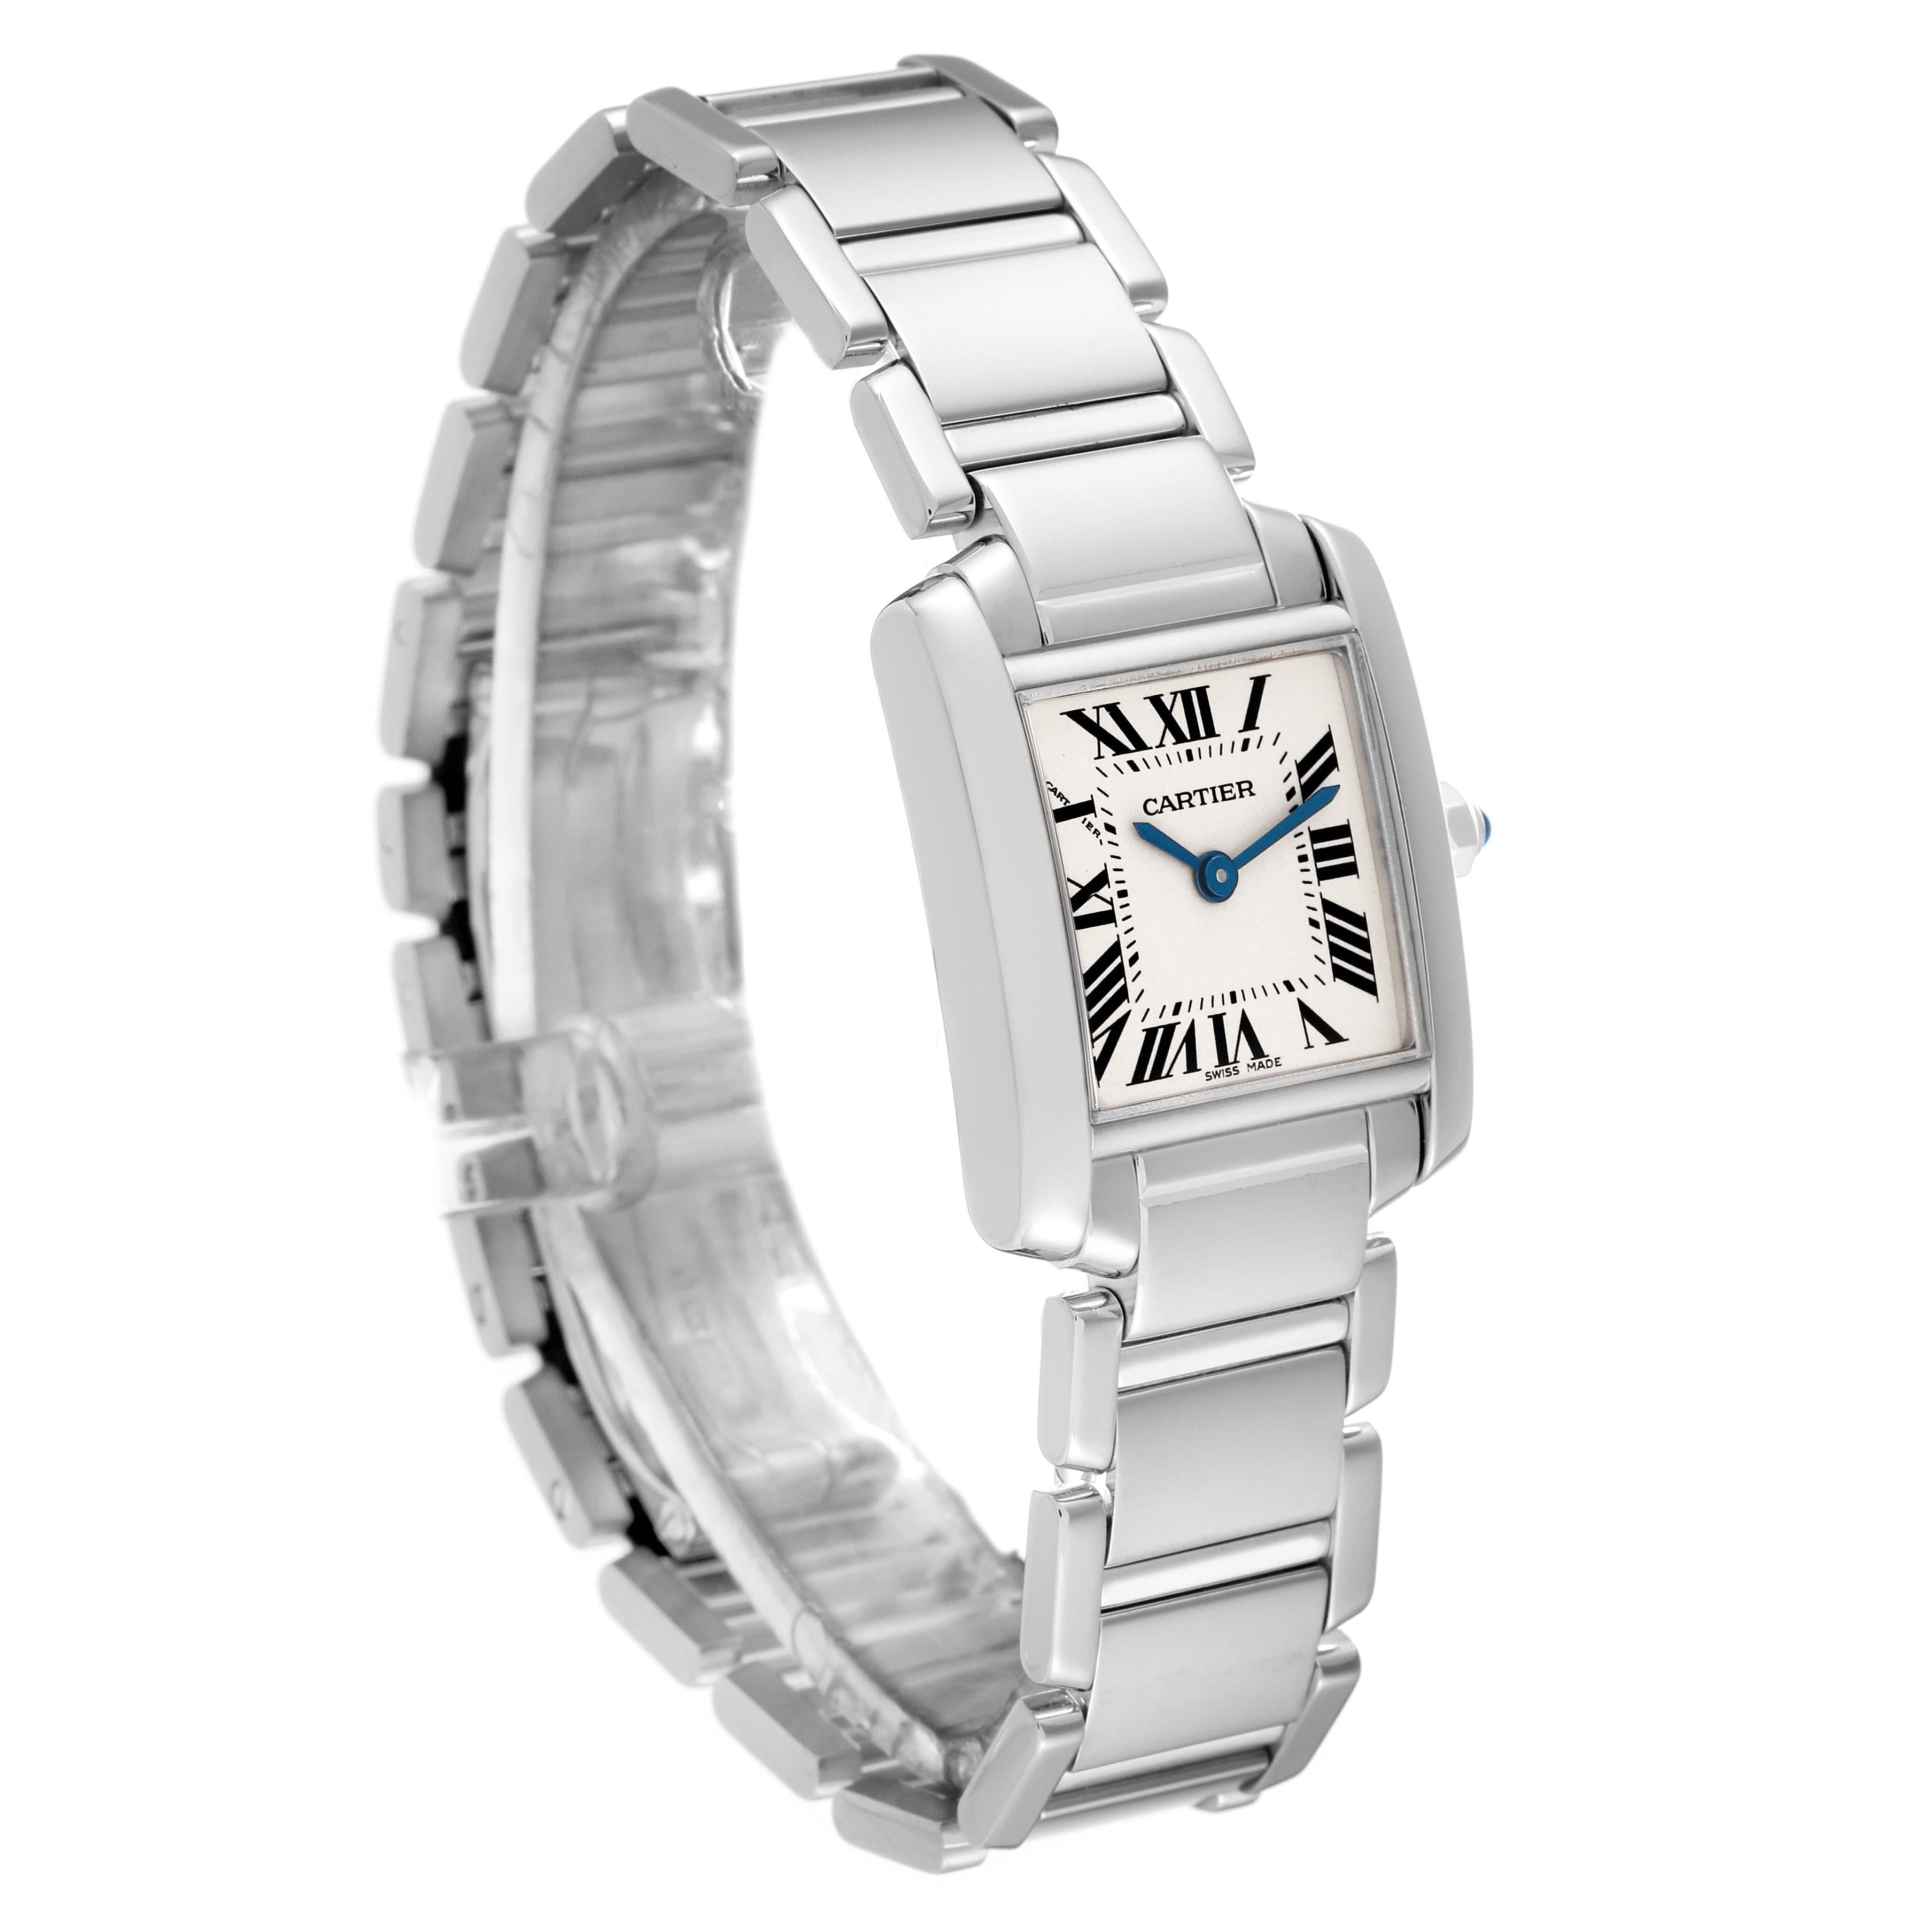 Cartier Tank Francaise White Gold Quartz Ladies Watch W50012S3 Box Papers In Excellent Condition For Sale In Atlanta, GA